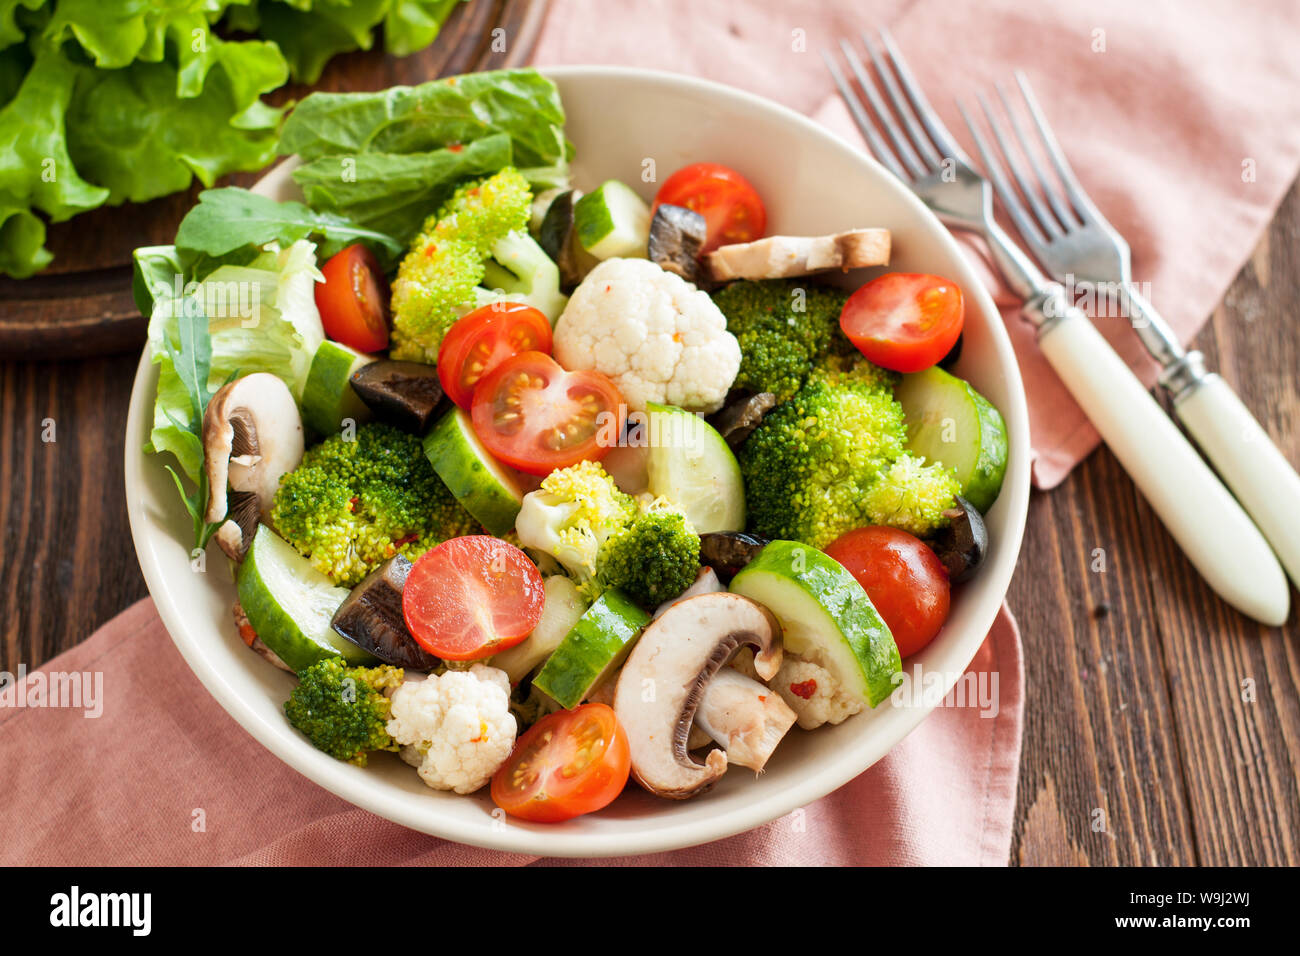 Flavorful Italian salad with marinated vegetables, mushrooms, cherry tomatoes and Parmesan on wooden background Stock Photo